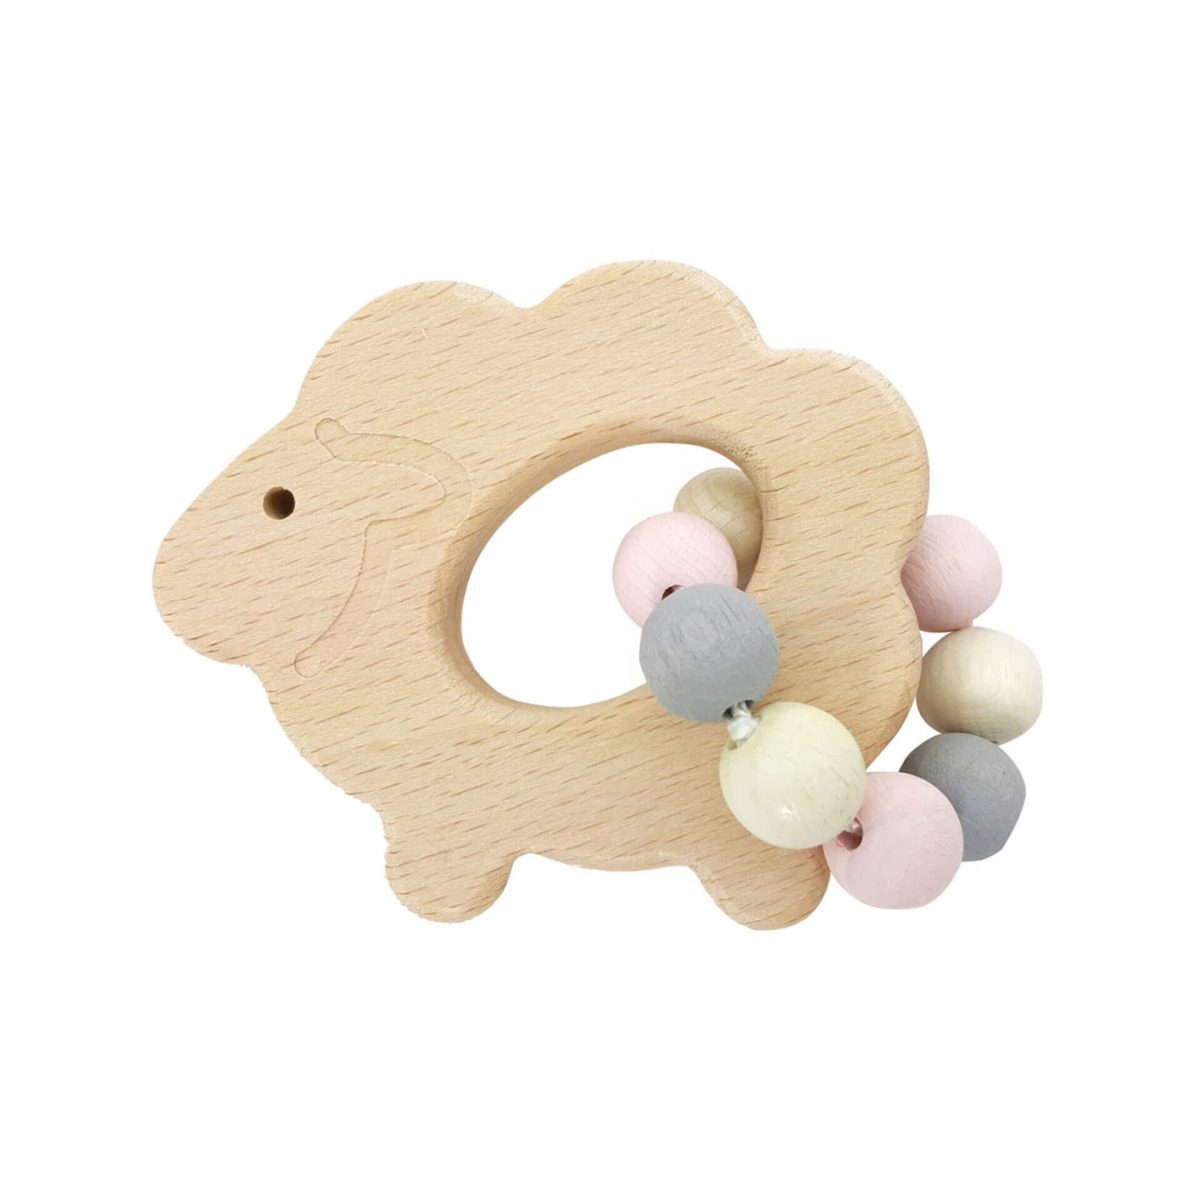 Wooden Sheep Rattle - Natural Pink - Hess-Spielzeug